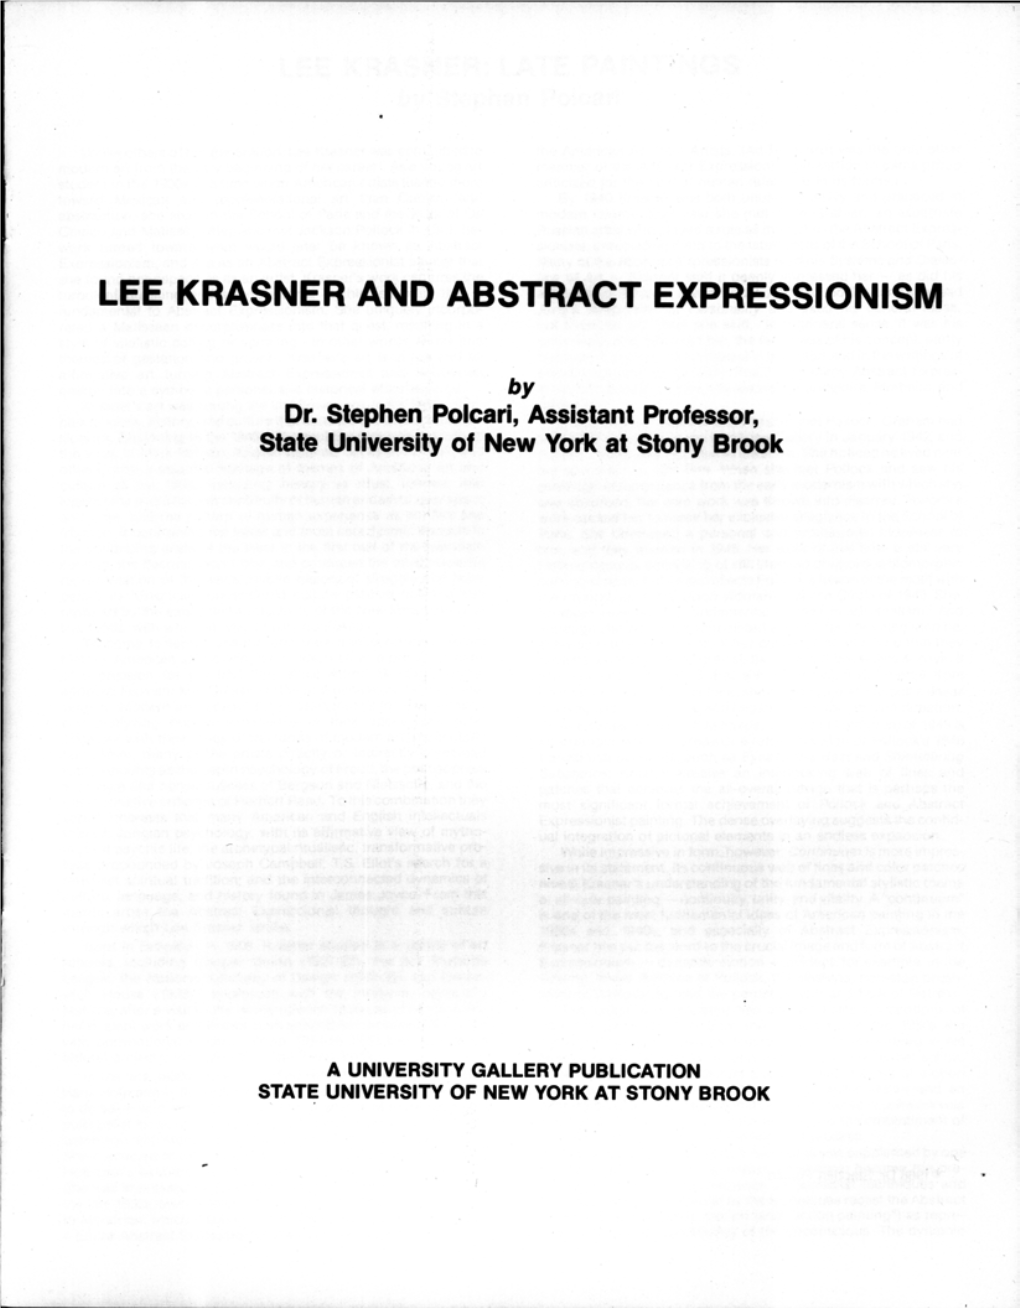 Lee Krasner and Abstract Expressionism